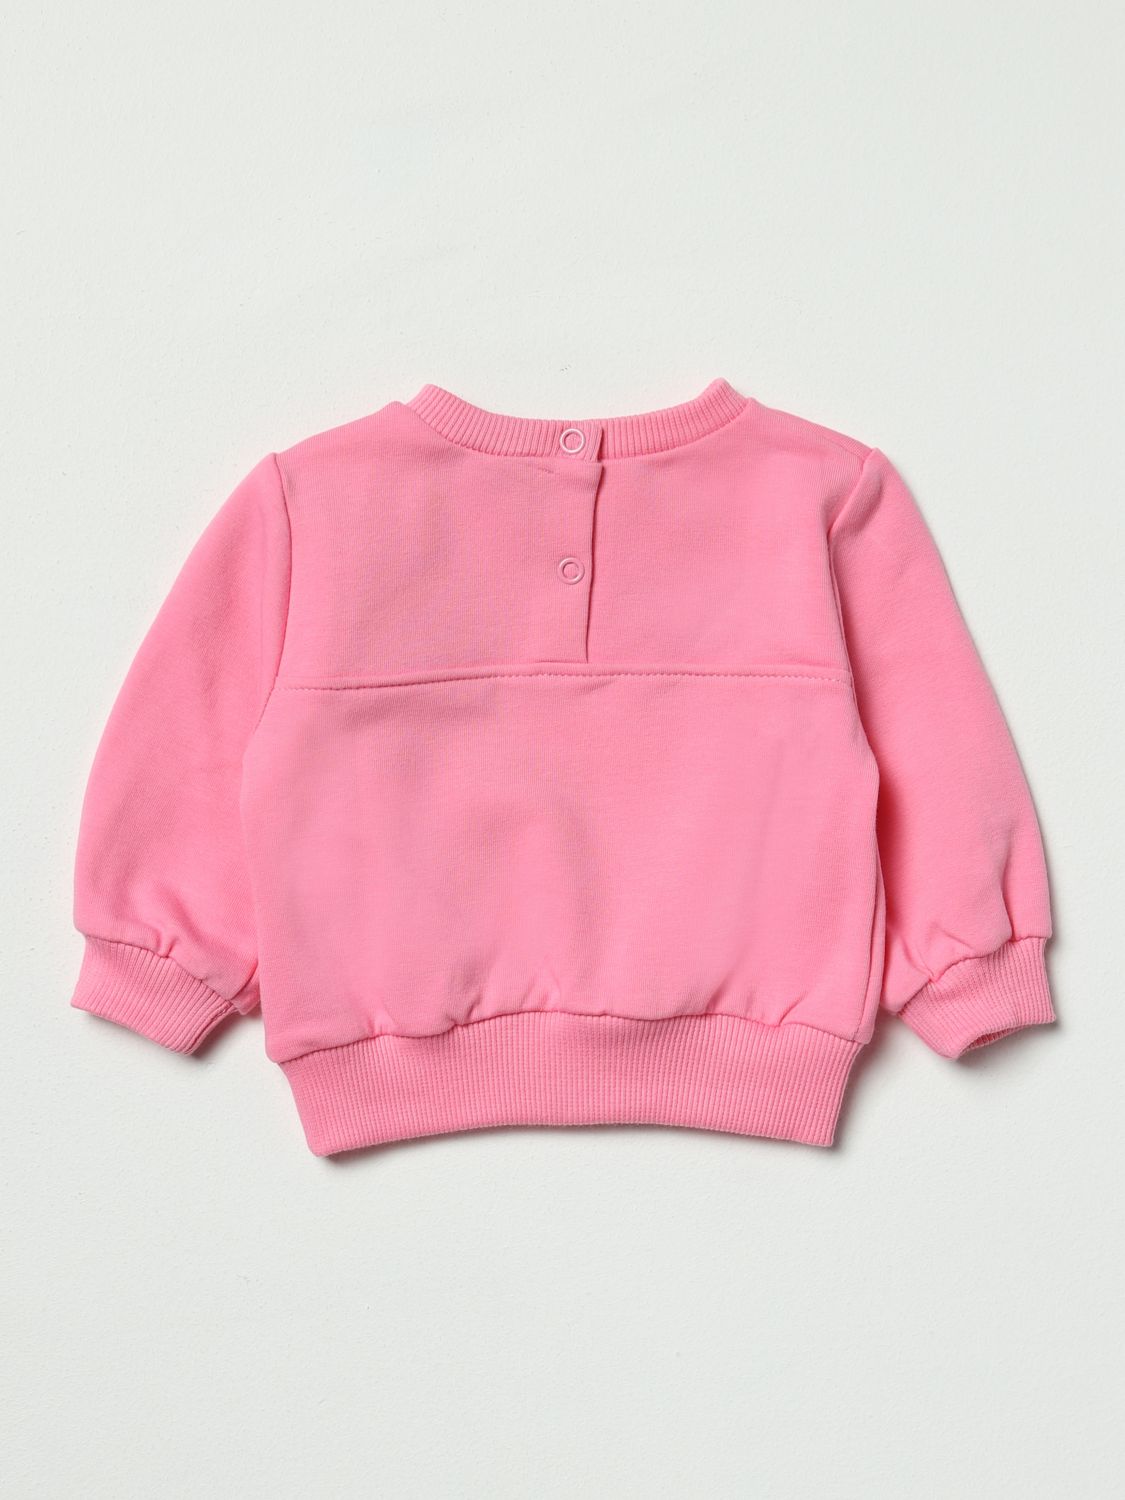 Sweater Chiara Ferragni: Chiara Ferragni sweater for baby pink 2